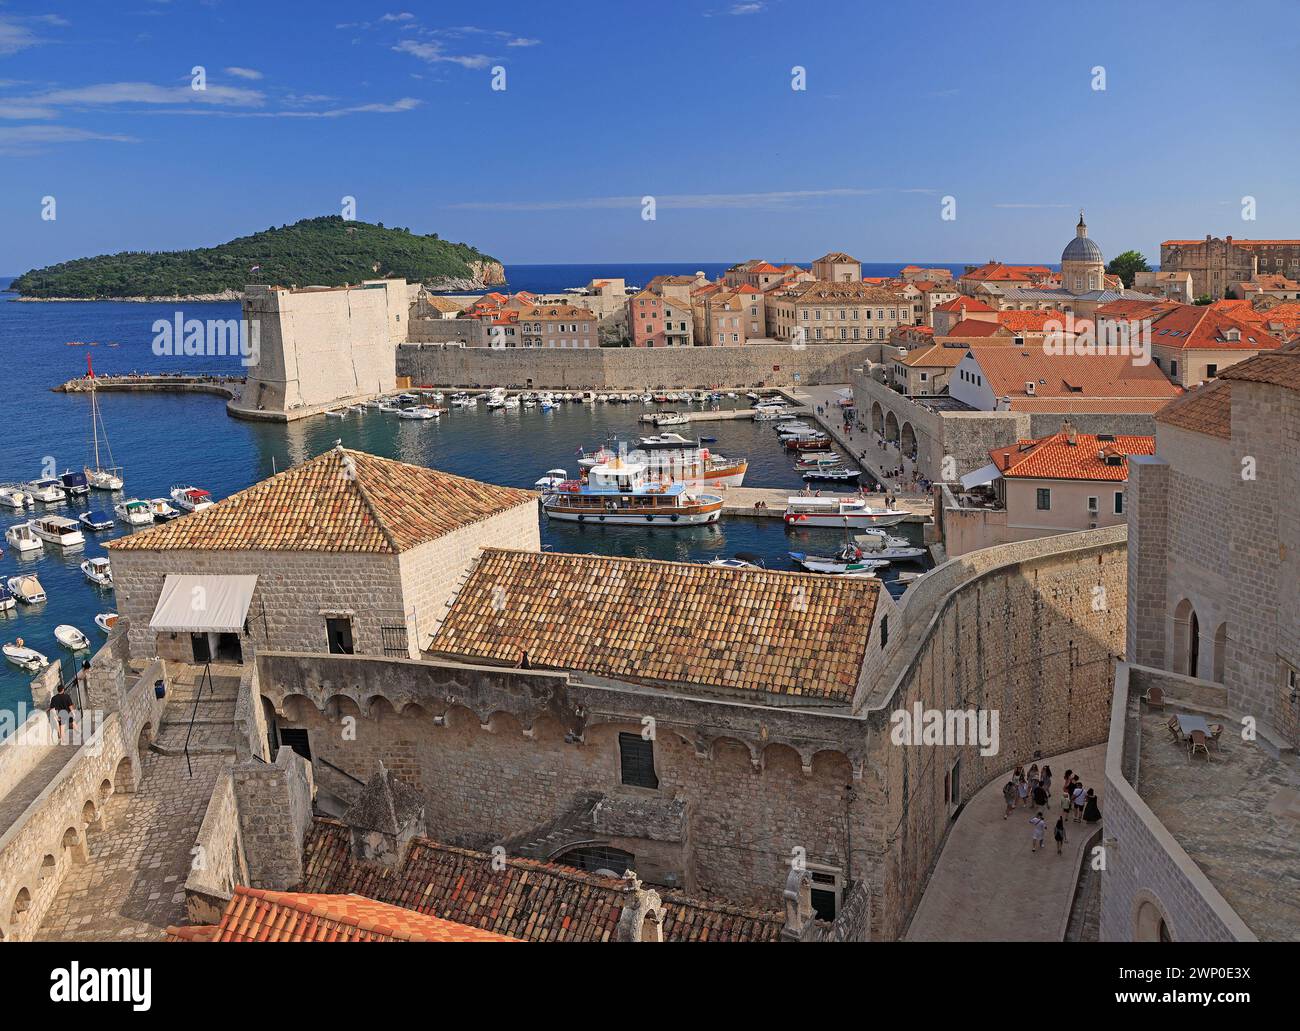 Aerial view of old Town of Dubrovnik on coast of Adriatic Sea, Croatia, Europe Stock Photo